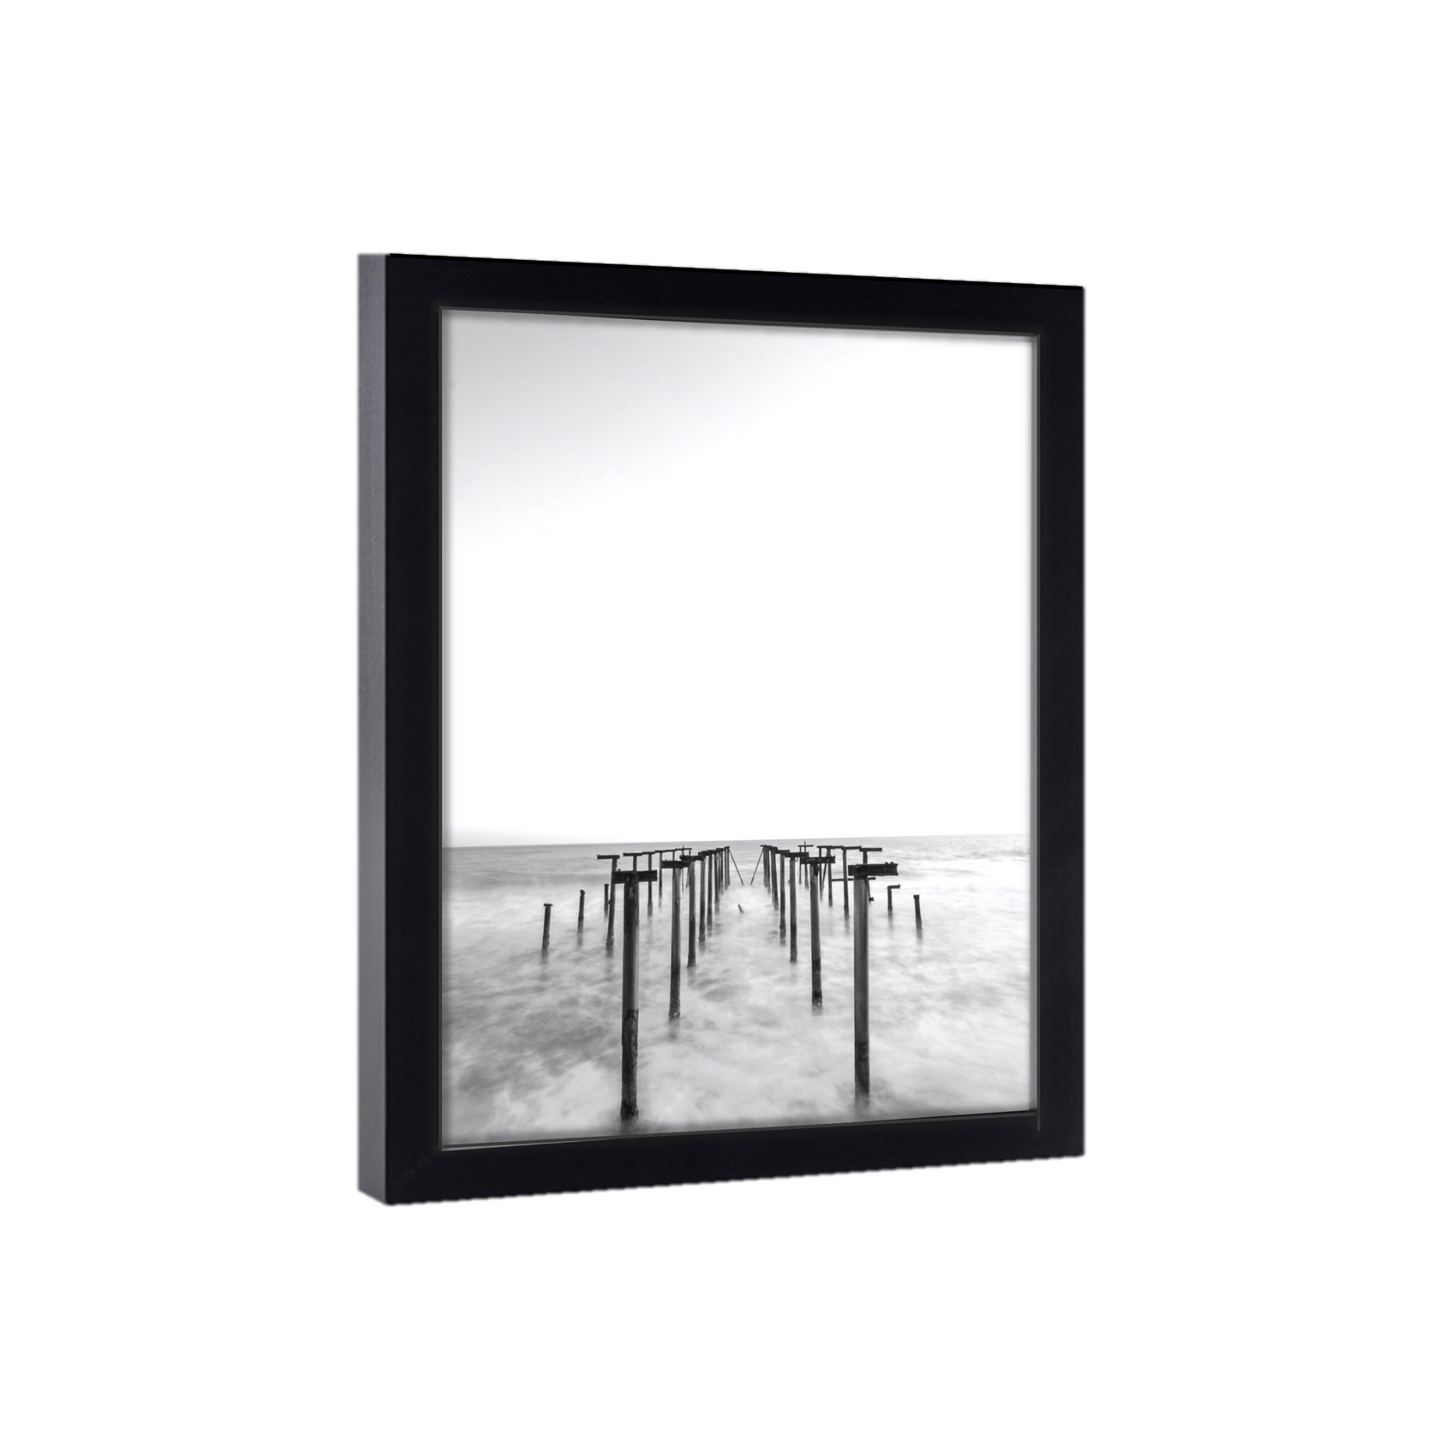 Gallery Wall 39x22 Picture Frame Black Wood 39x22  Poster Size